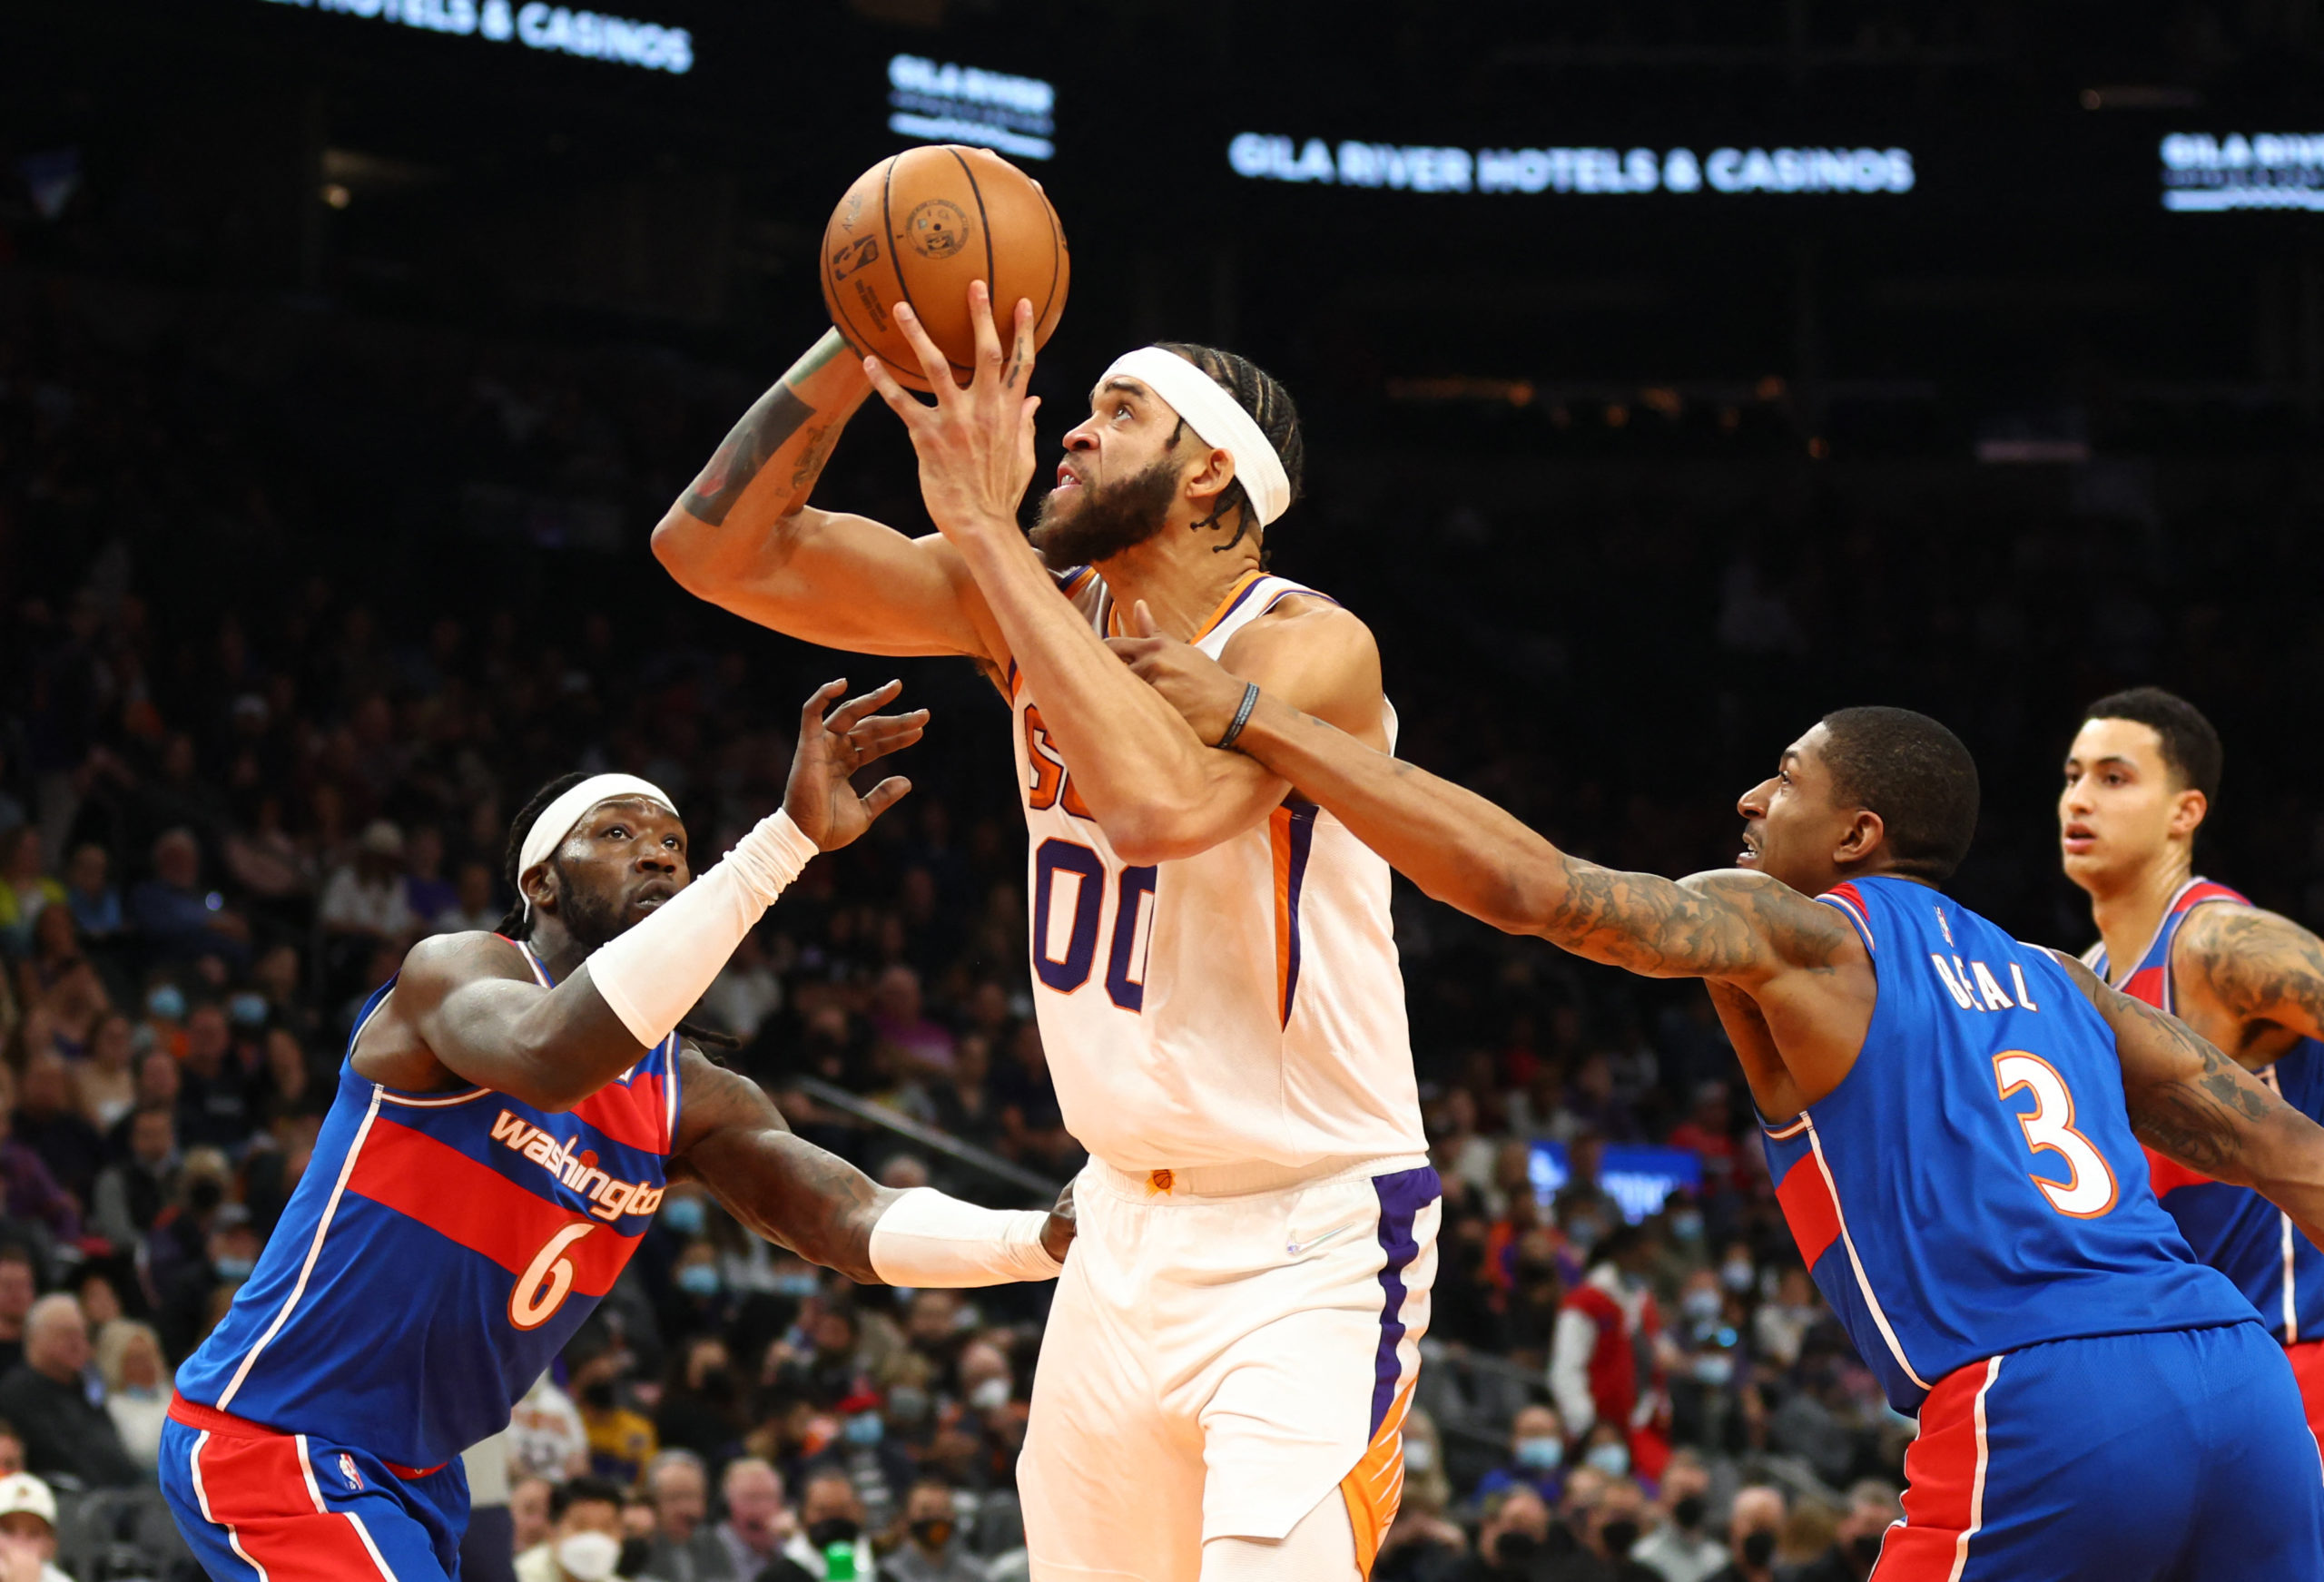 Phoenix Suns center JaVale McGee (00) drives to the basket against the Washington Wizards in the first half at Footprint Center.